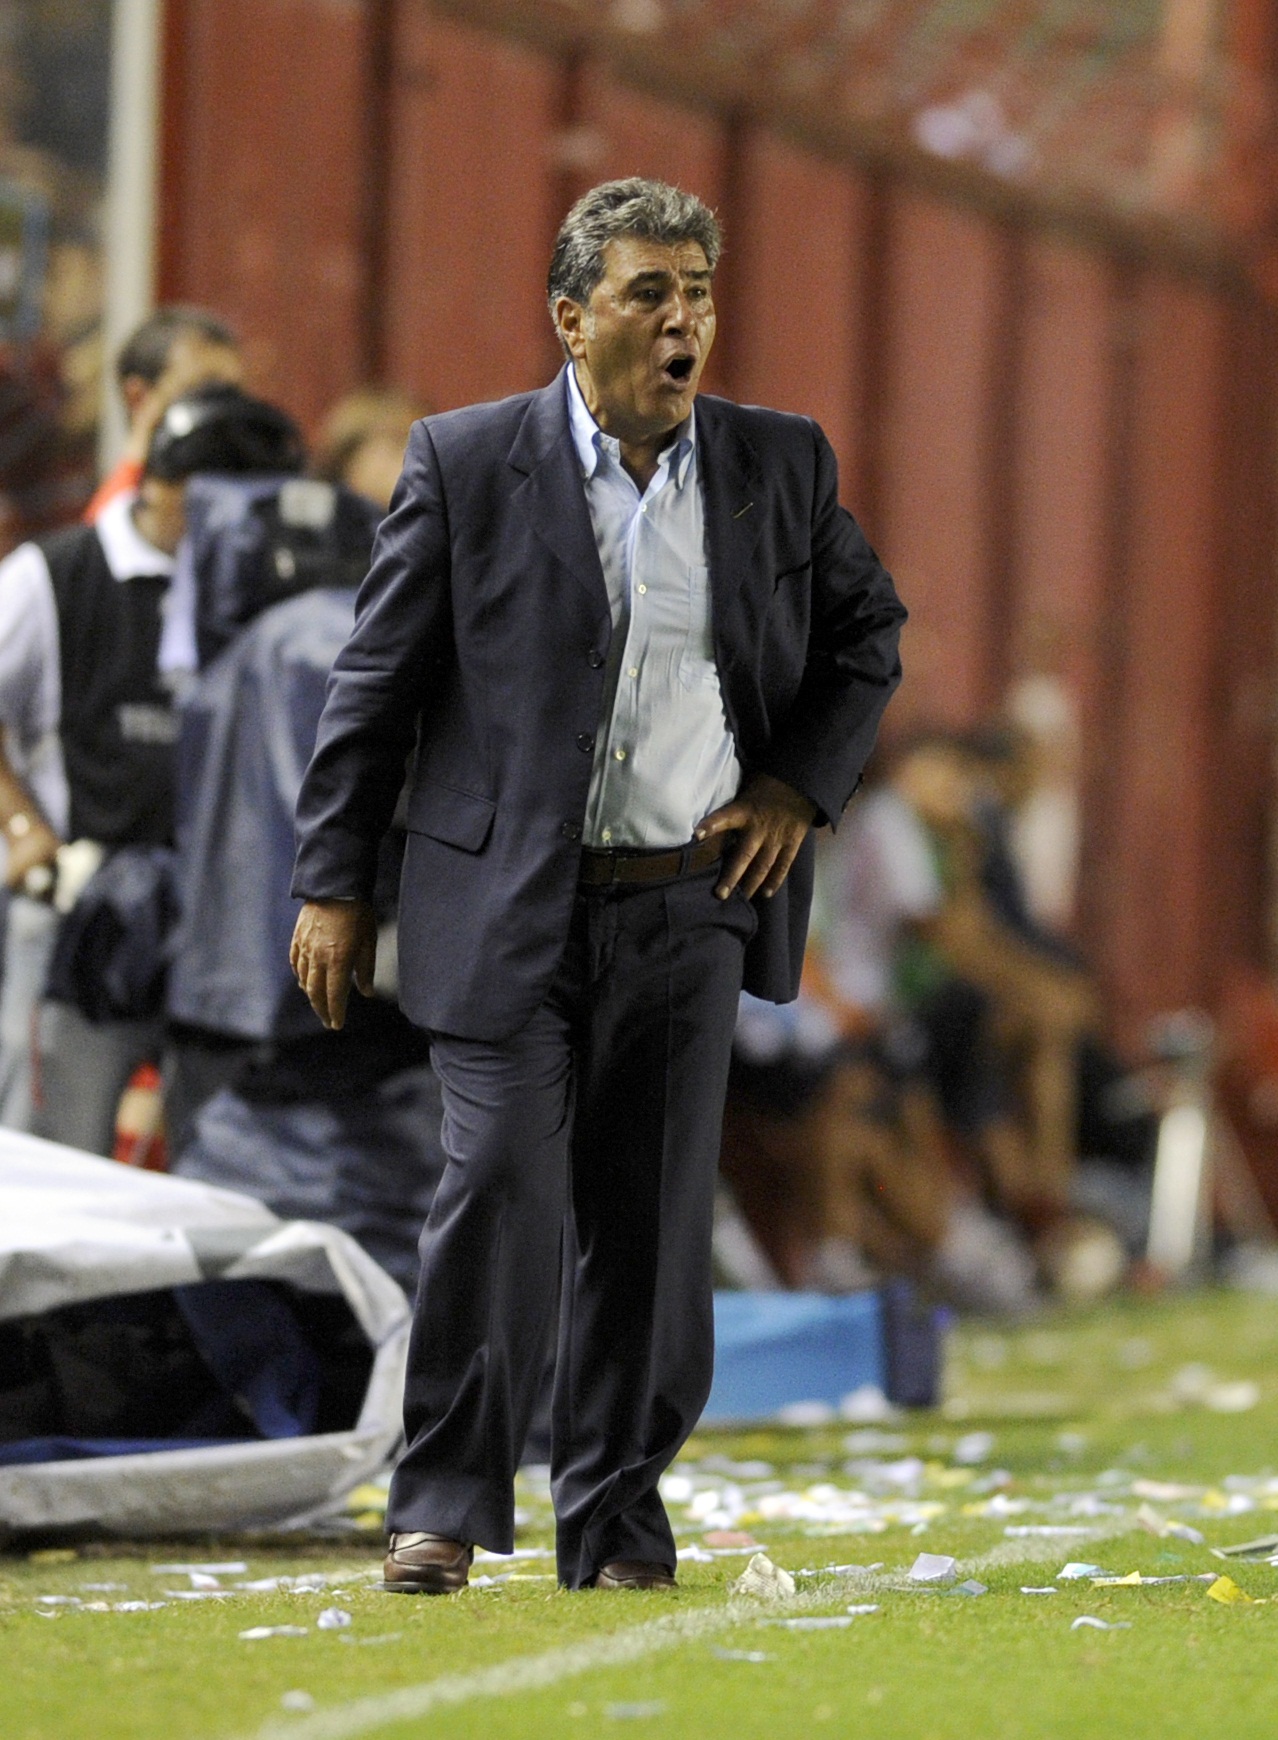 Chilian coach Carlos Reinoso of Mexico's CF America gestures during the Copa Libertadores 2011 group 3 football match against Argentinos Juniors of Argentina at Diego Maradona stadium in Buenos Aires, Argentina, on February 24, 2011. Argentinos Juniors won 3-1. AFP PHOTO / Juan Mabromata (Photo credit should read JUAN MABROMATA/AFP/Getty Images)